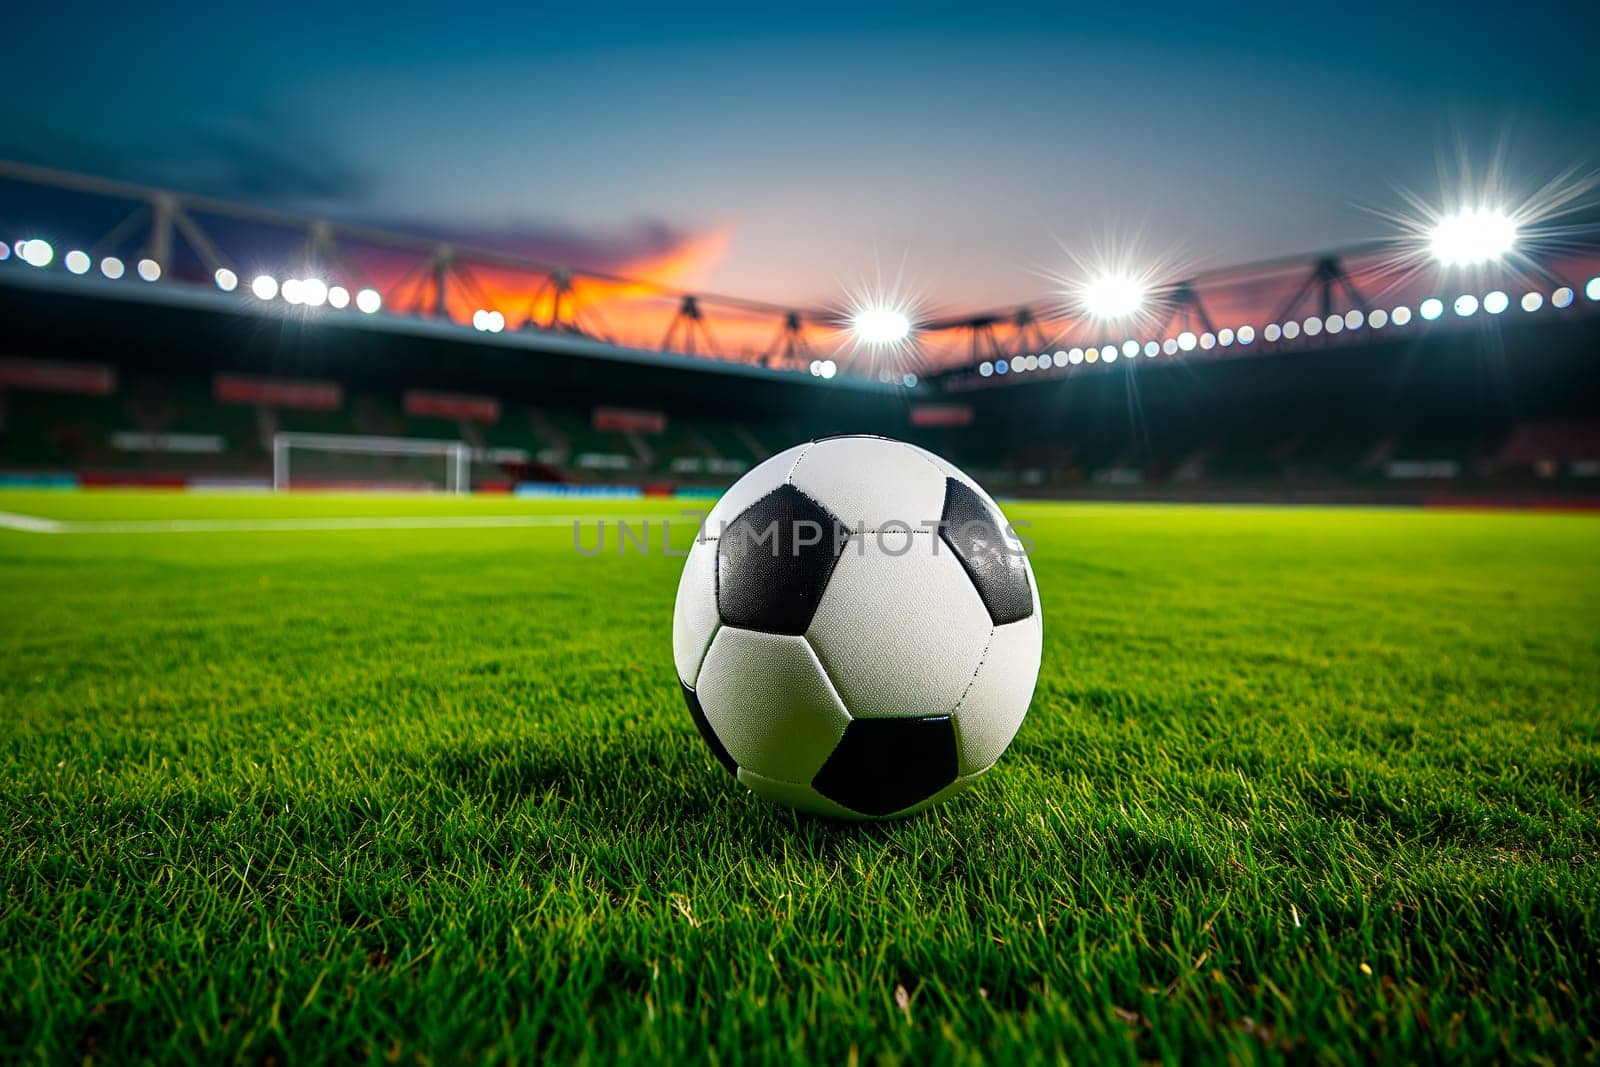 A soccer ball on a green field in soccer football stadium in evening with floodlights lights